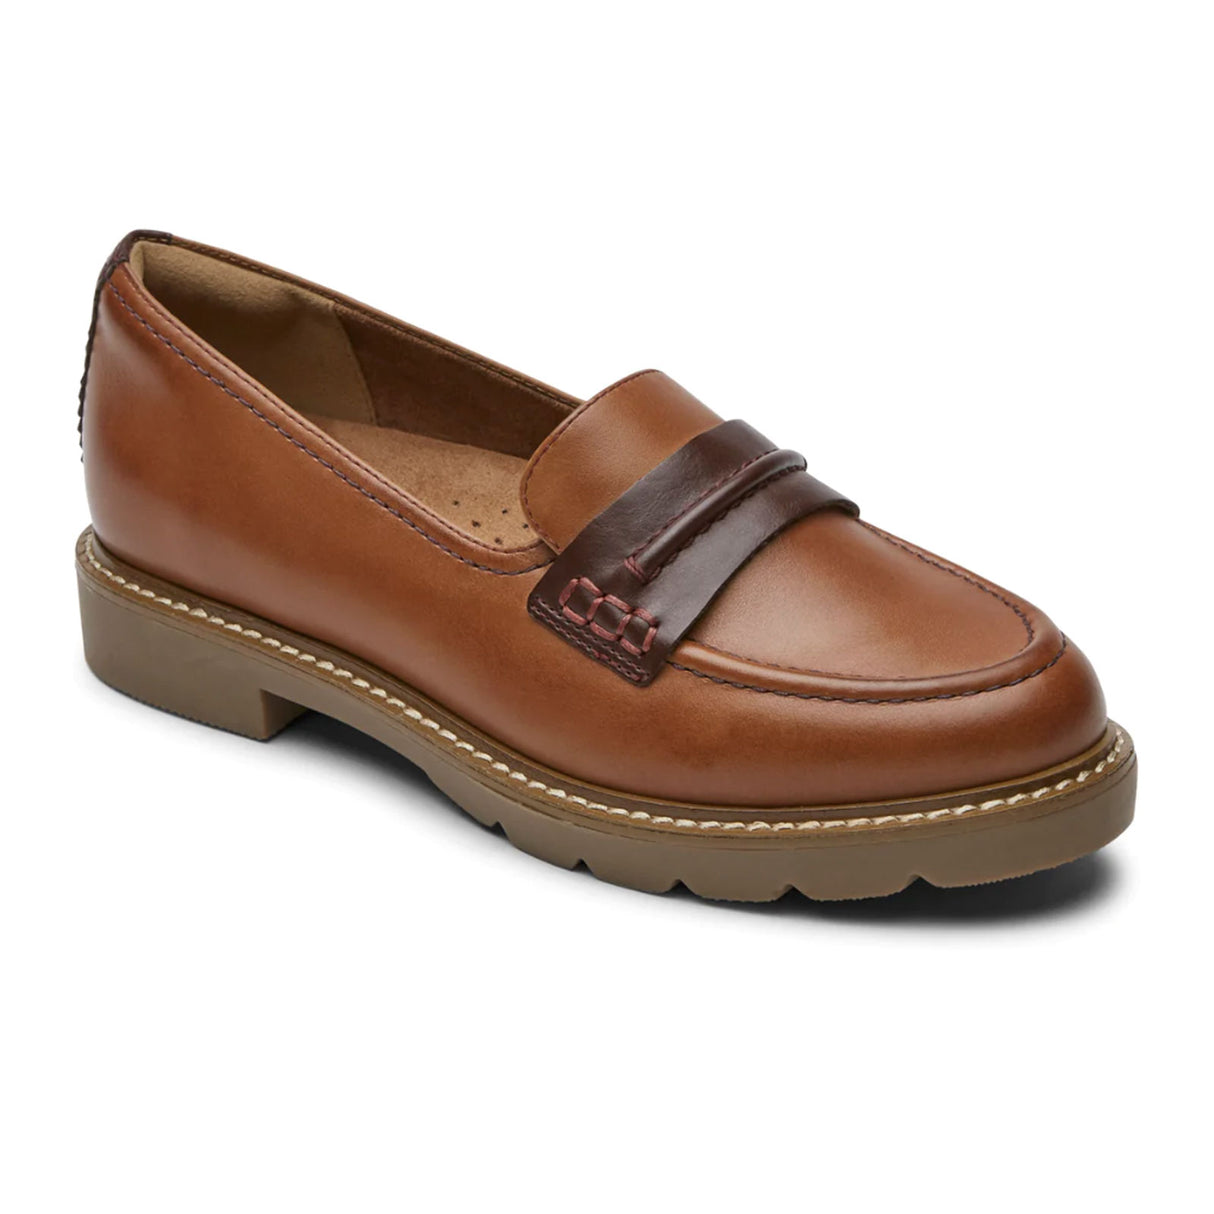 Cobb Hill Janney Loafer (Women) - Toffee Tan Leather Dress-Casual - Loafers - The Heel Shoe Fitters